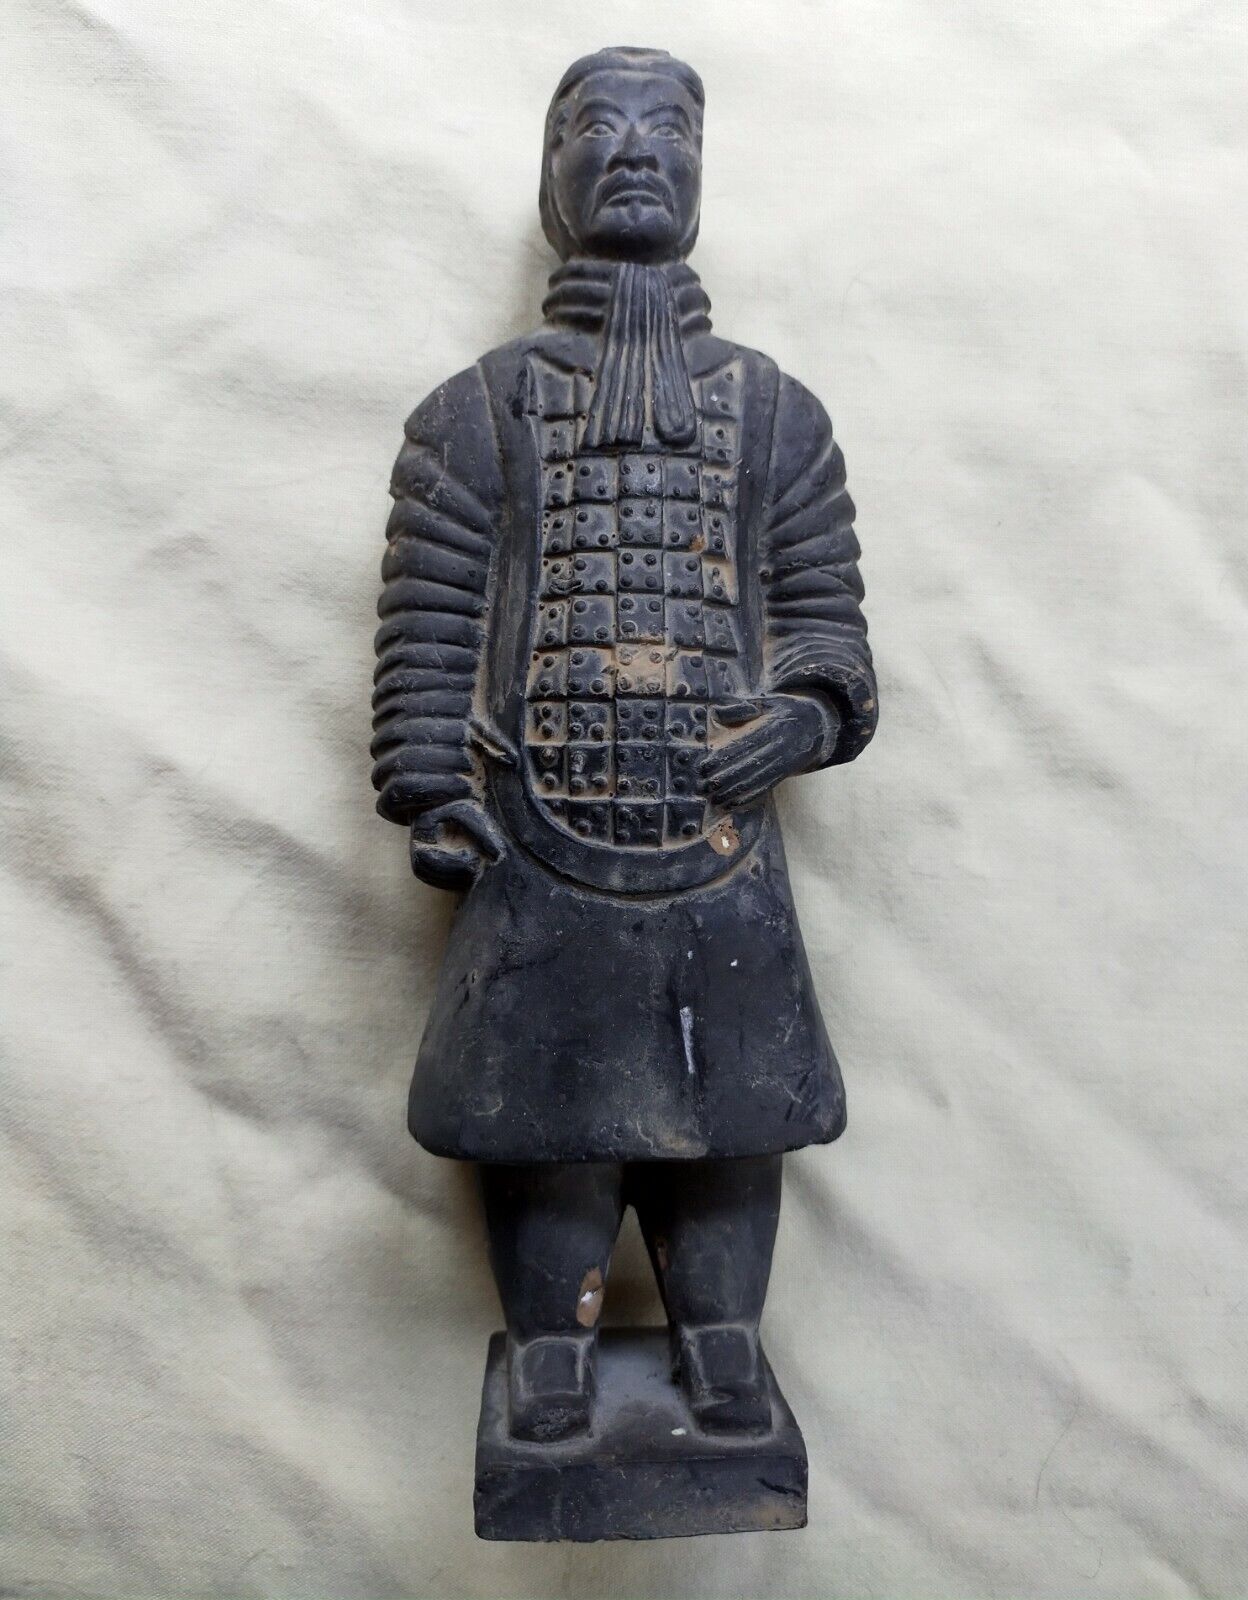 Antique Valuations: Chinese Terracotta Army Soldier